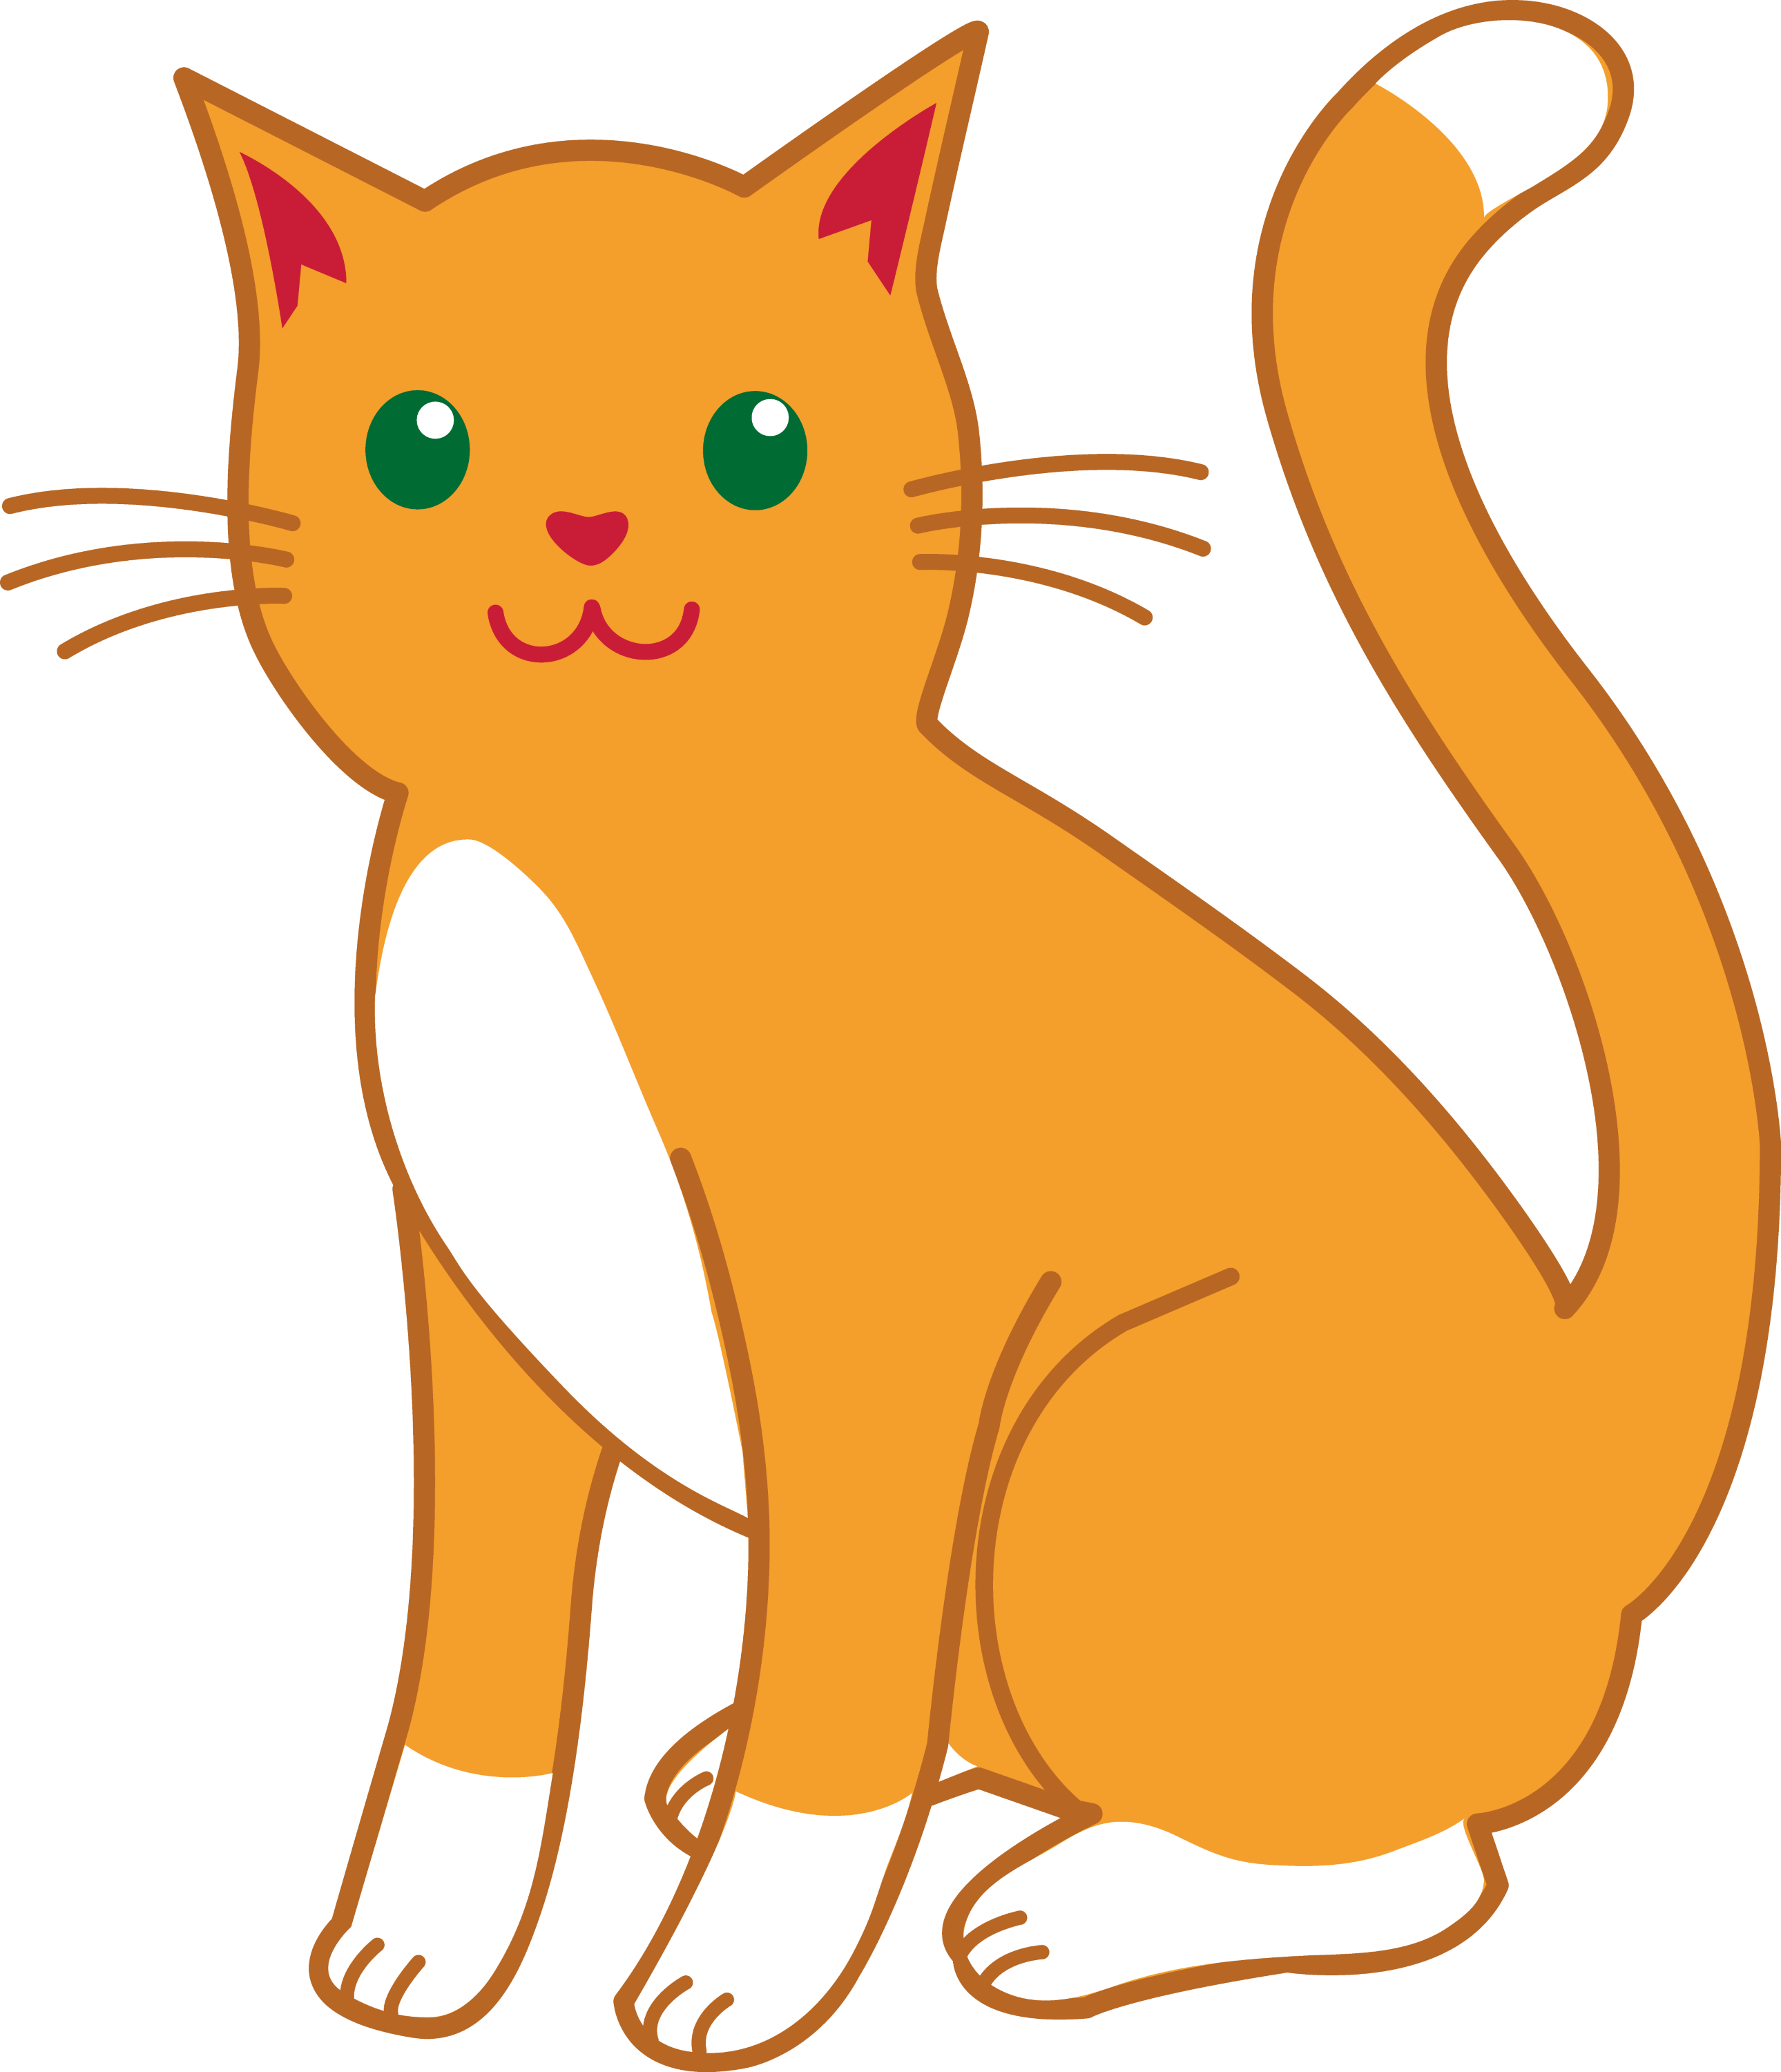 cat clipart royalty free - photo #36